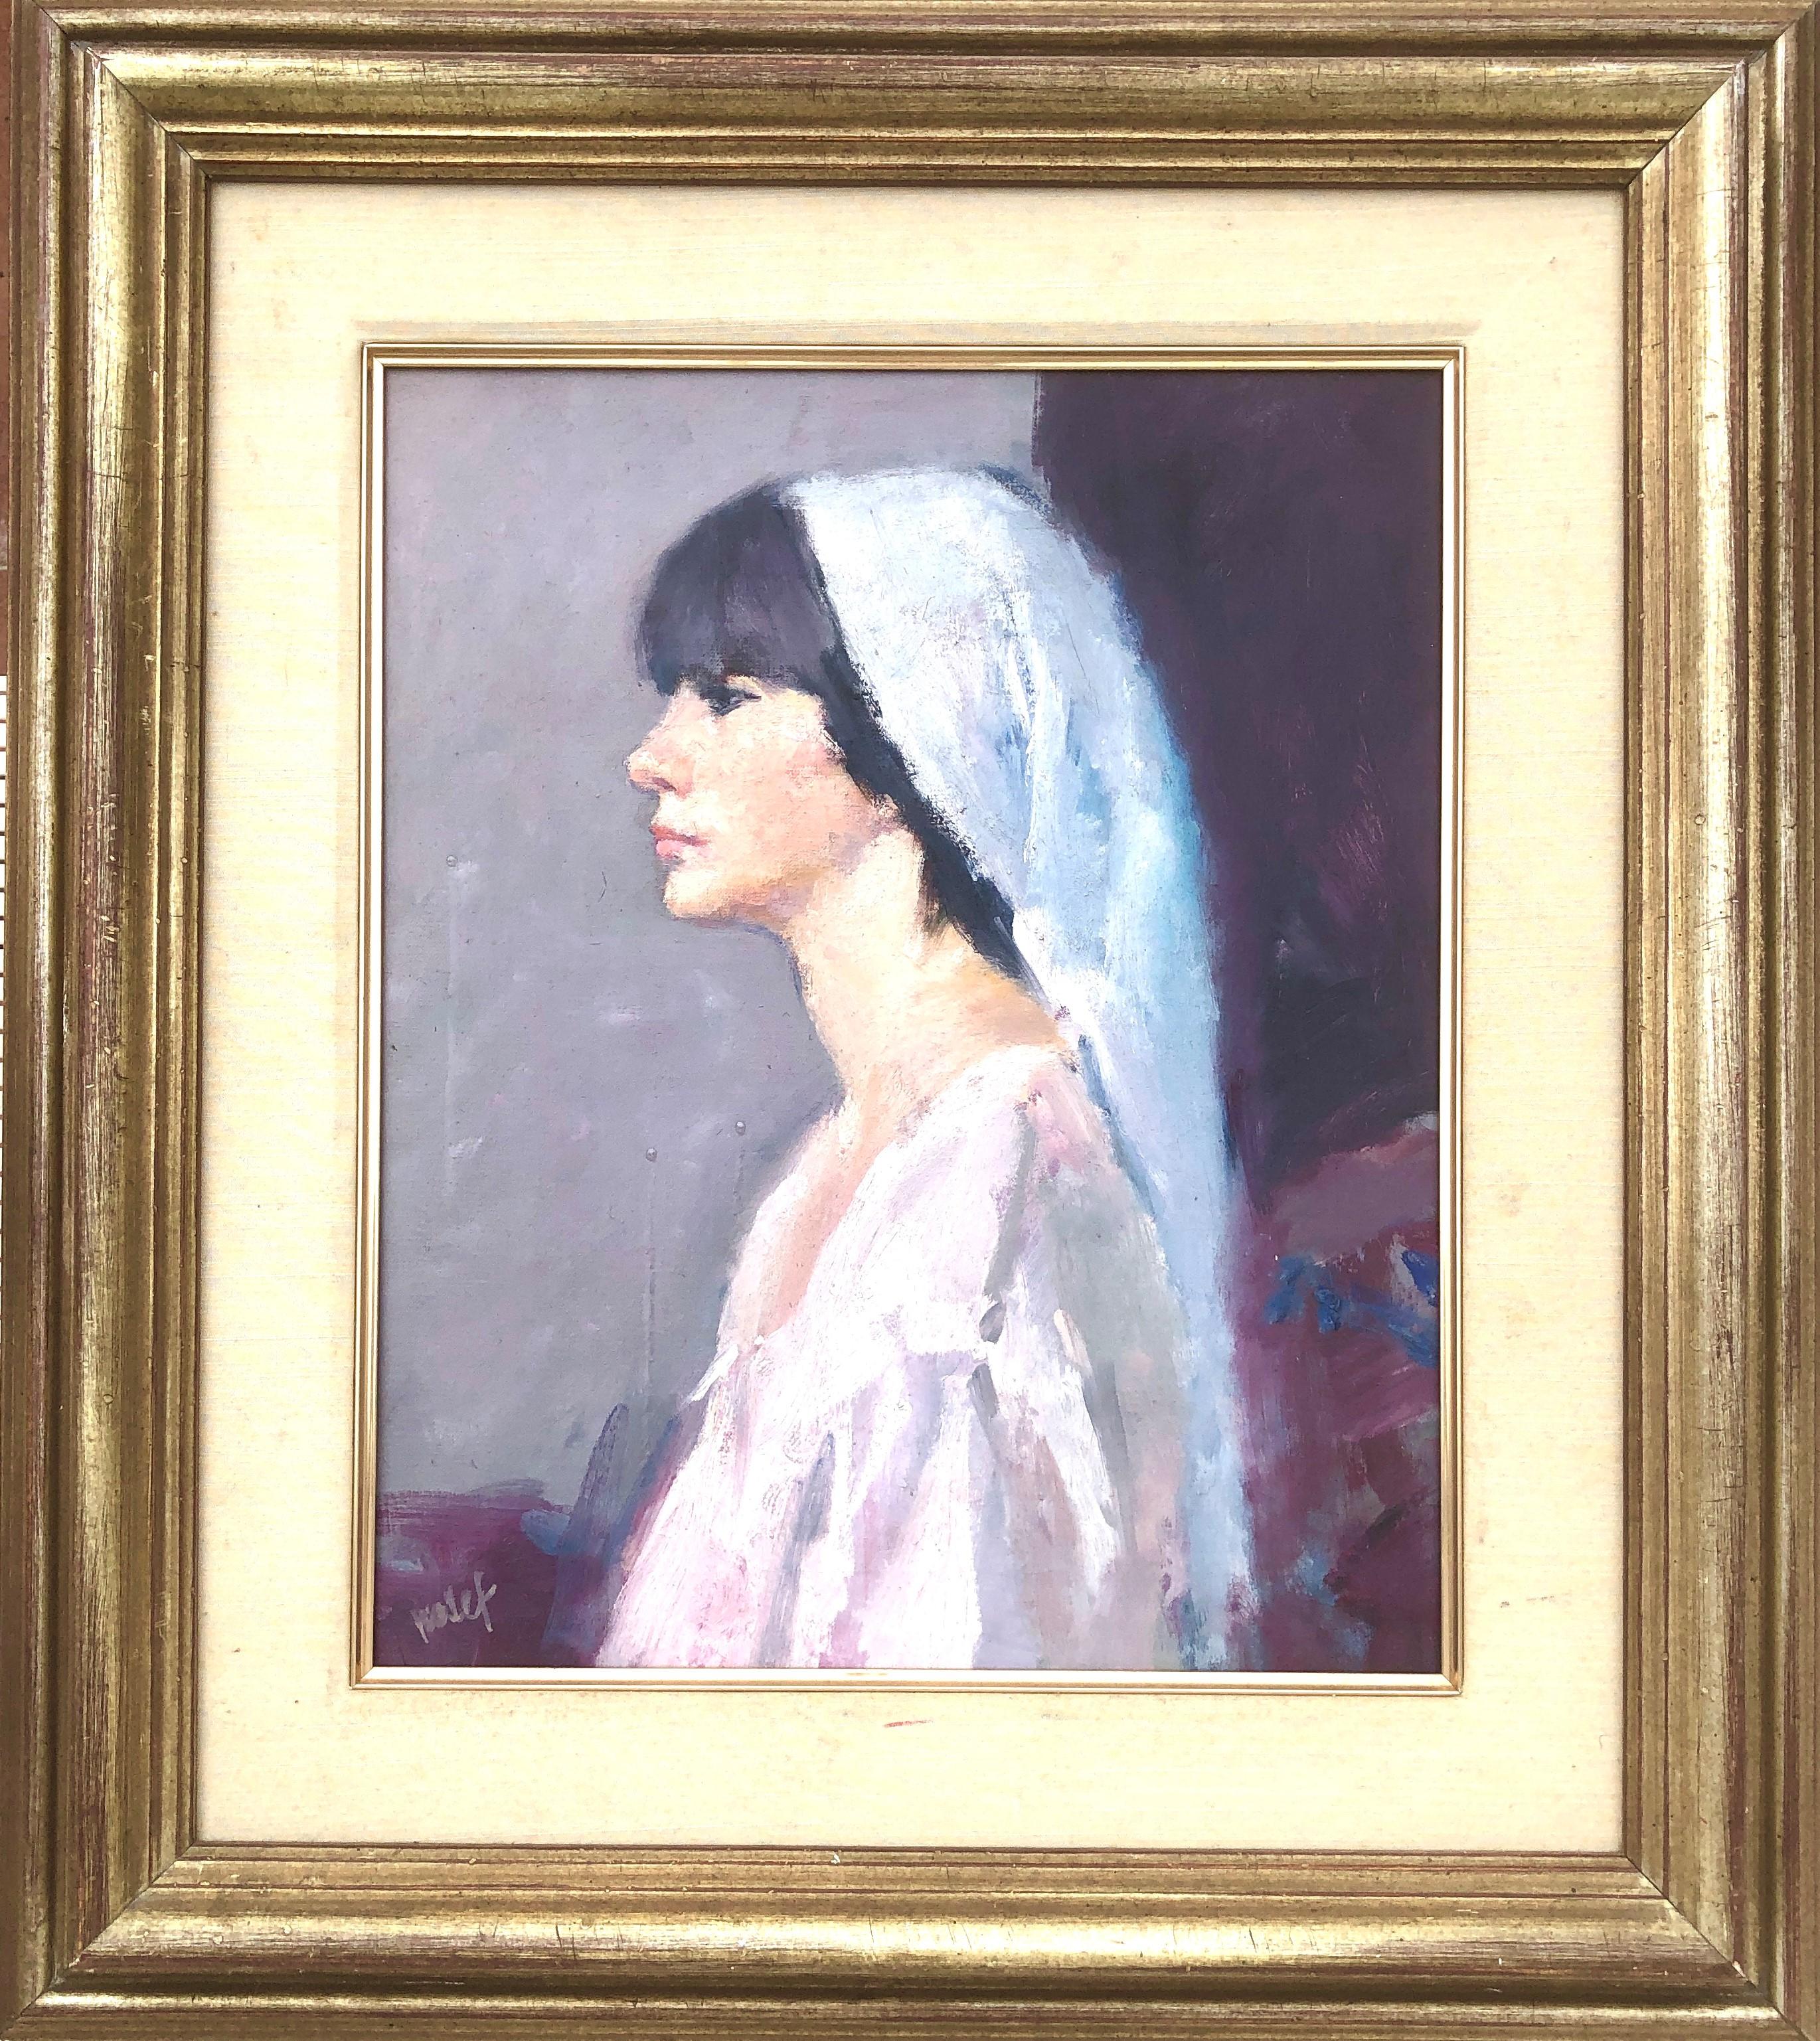 Female figure woman oil on canvas painting portrait - Painting by Joan Palet